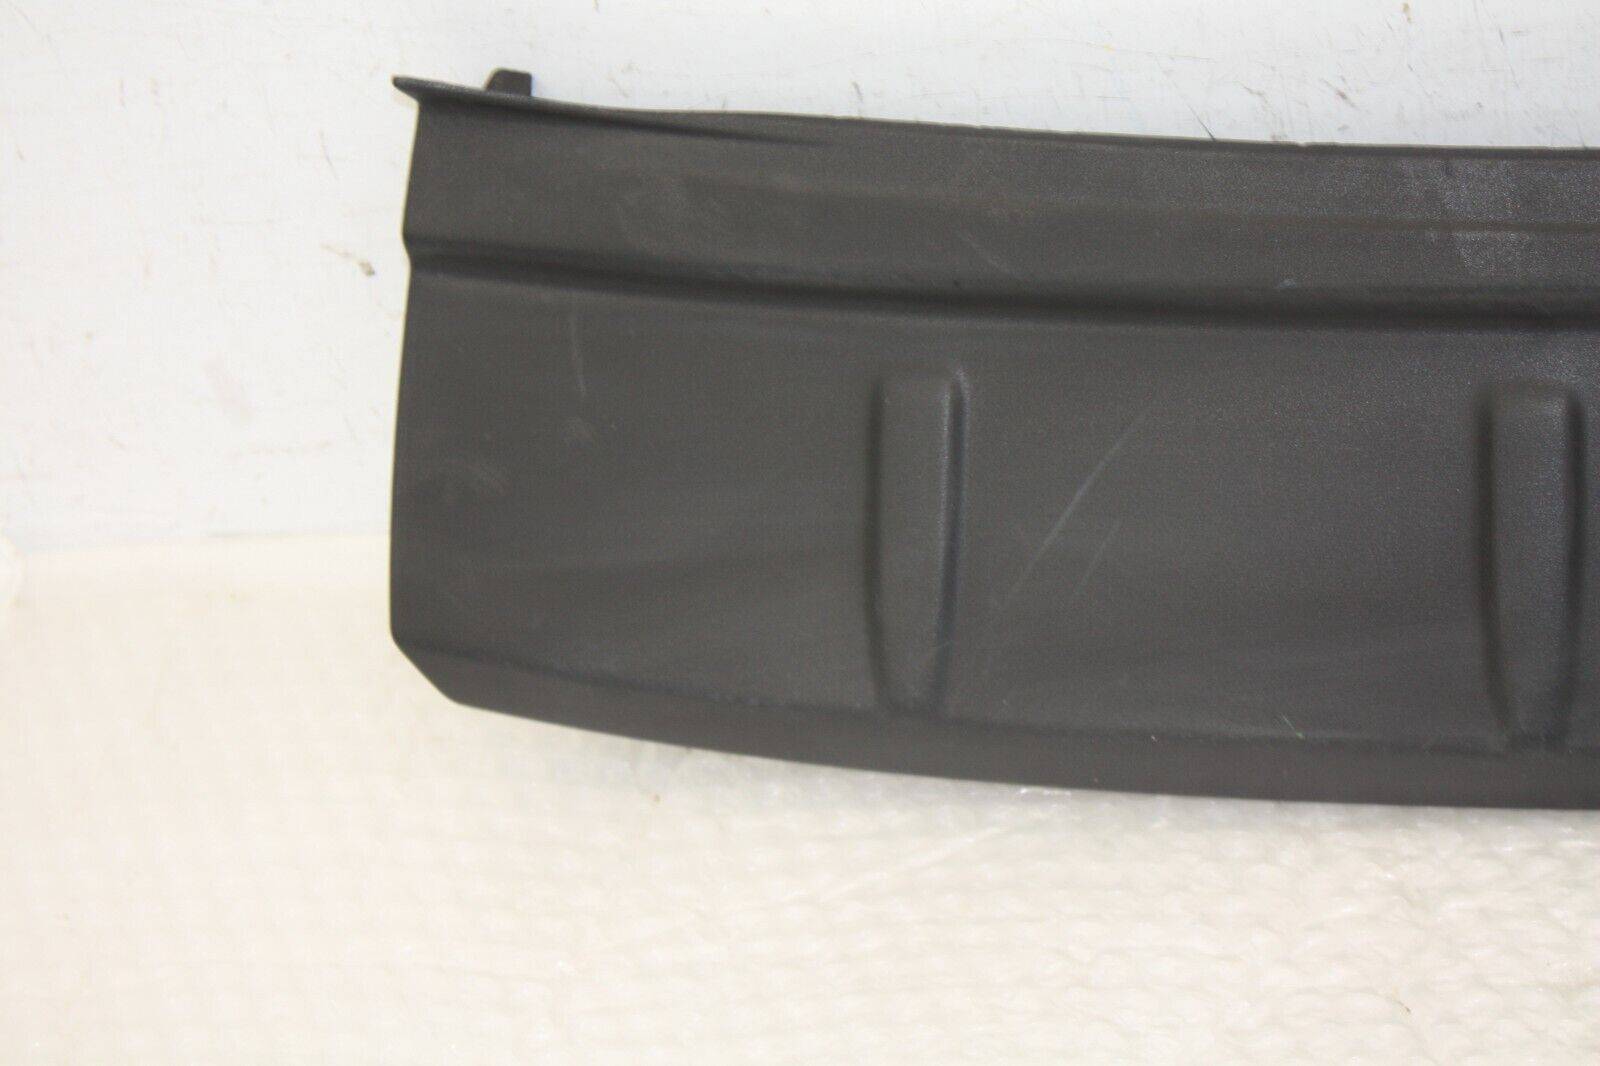 Volvo-XC60-Rear-Bumper-Protection-Cover-30764525-Genuine-FIXING-DAMAGED-176362657810-6